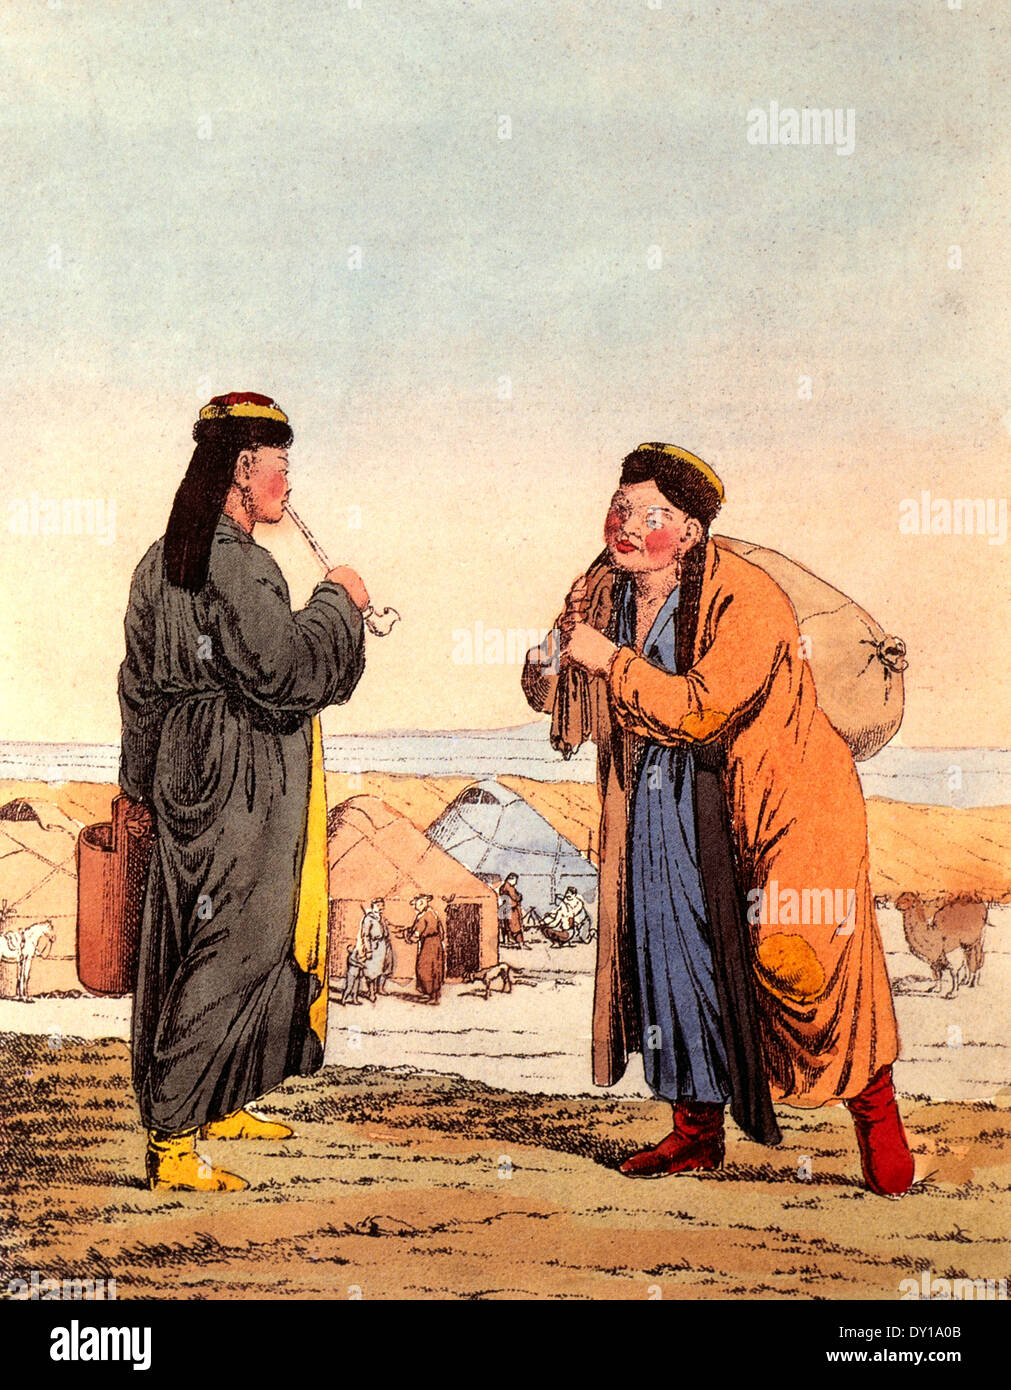 Two Kalmuk Women, from Travels Through the Southern Provinces of the Russian Empire in the Years 1793 & 1794 Stock Photo